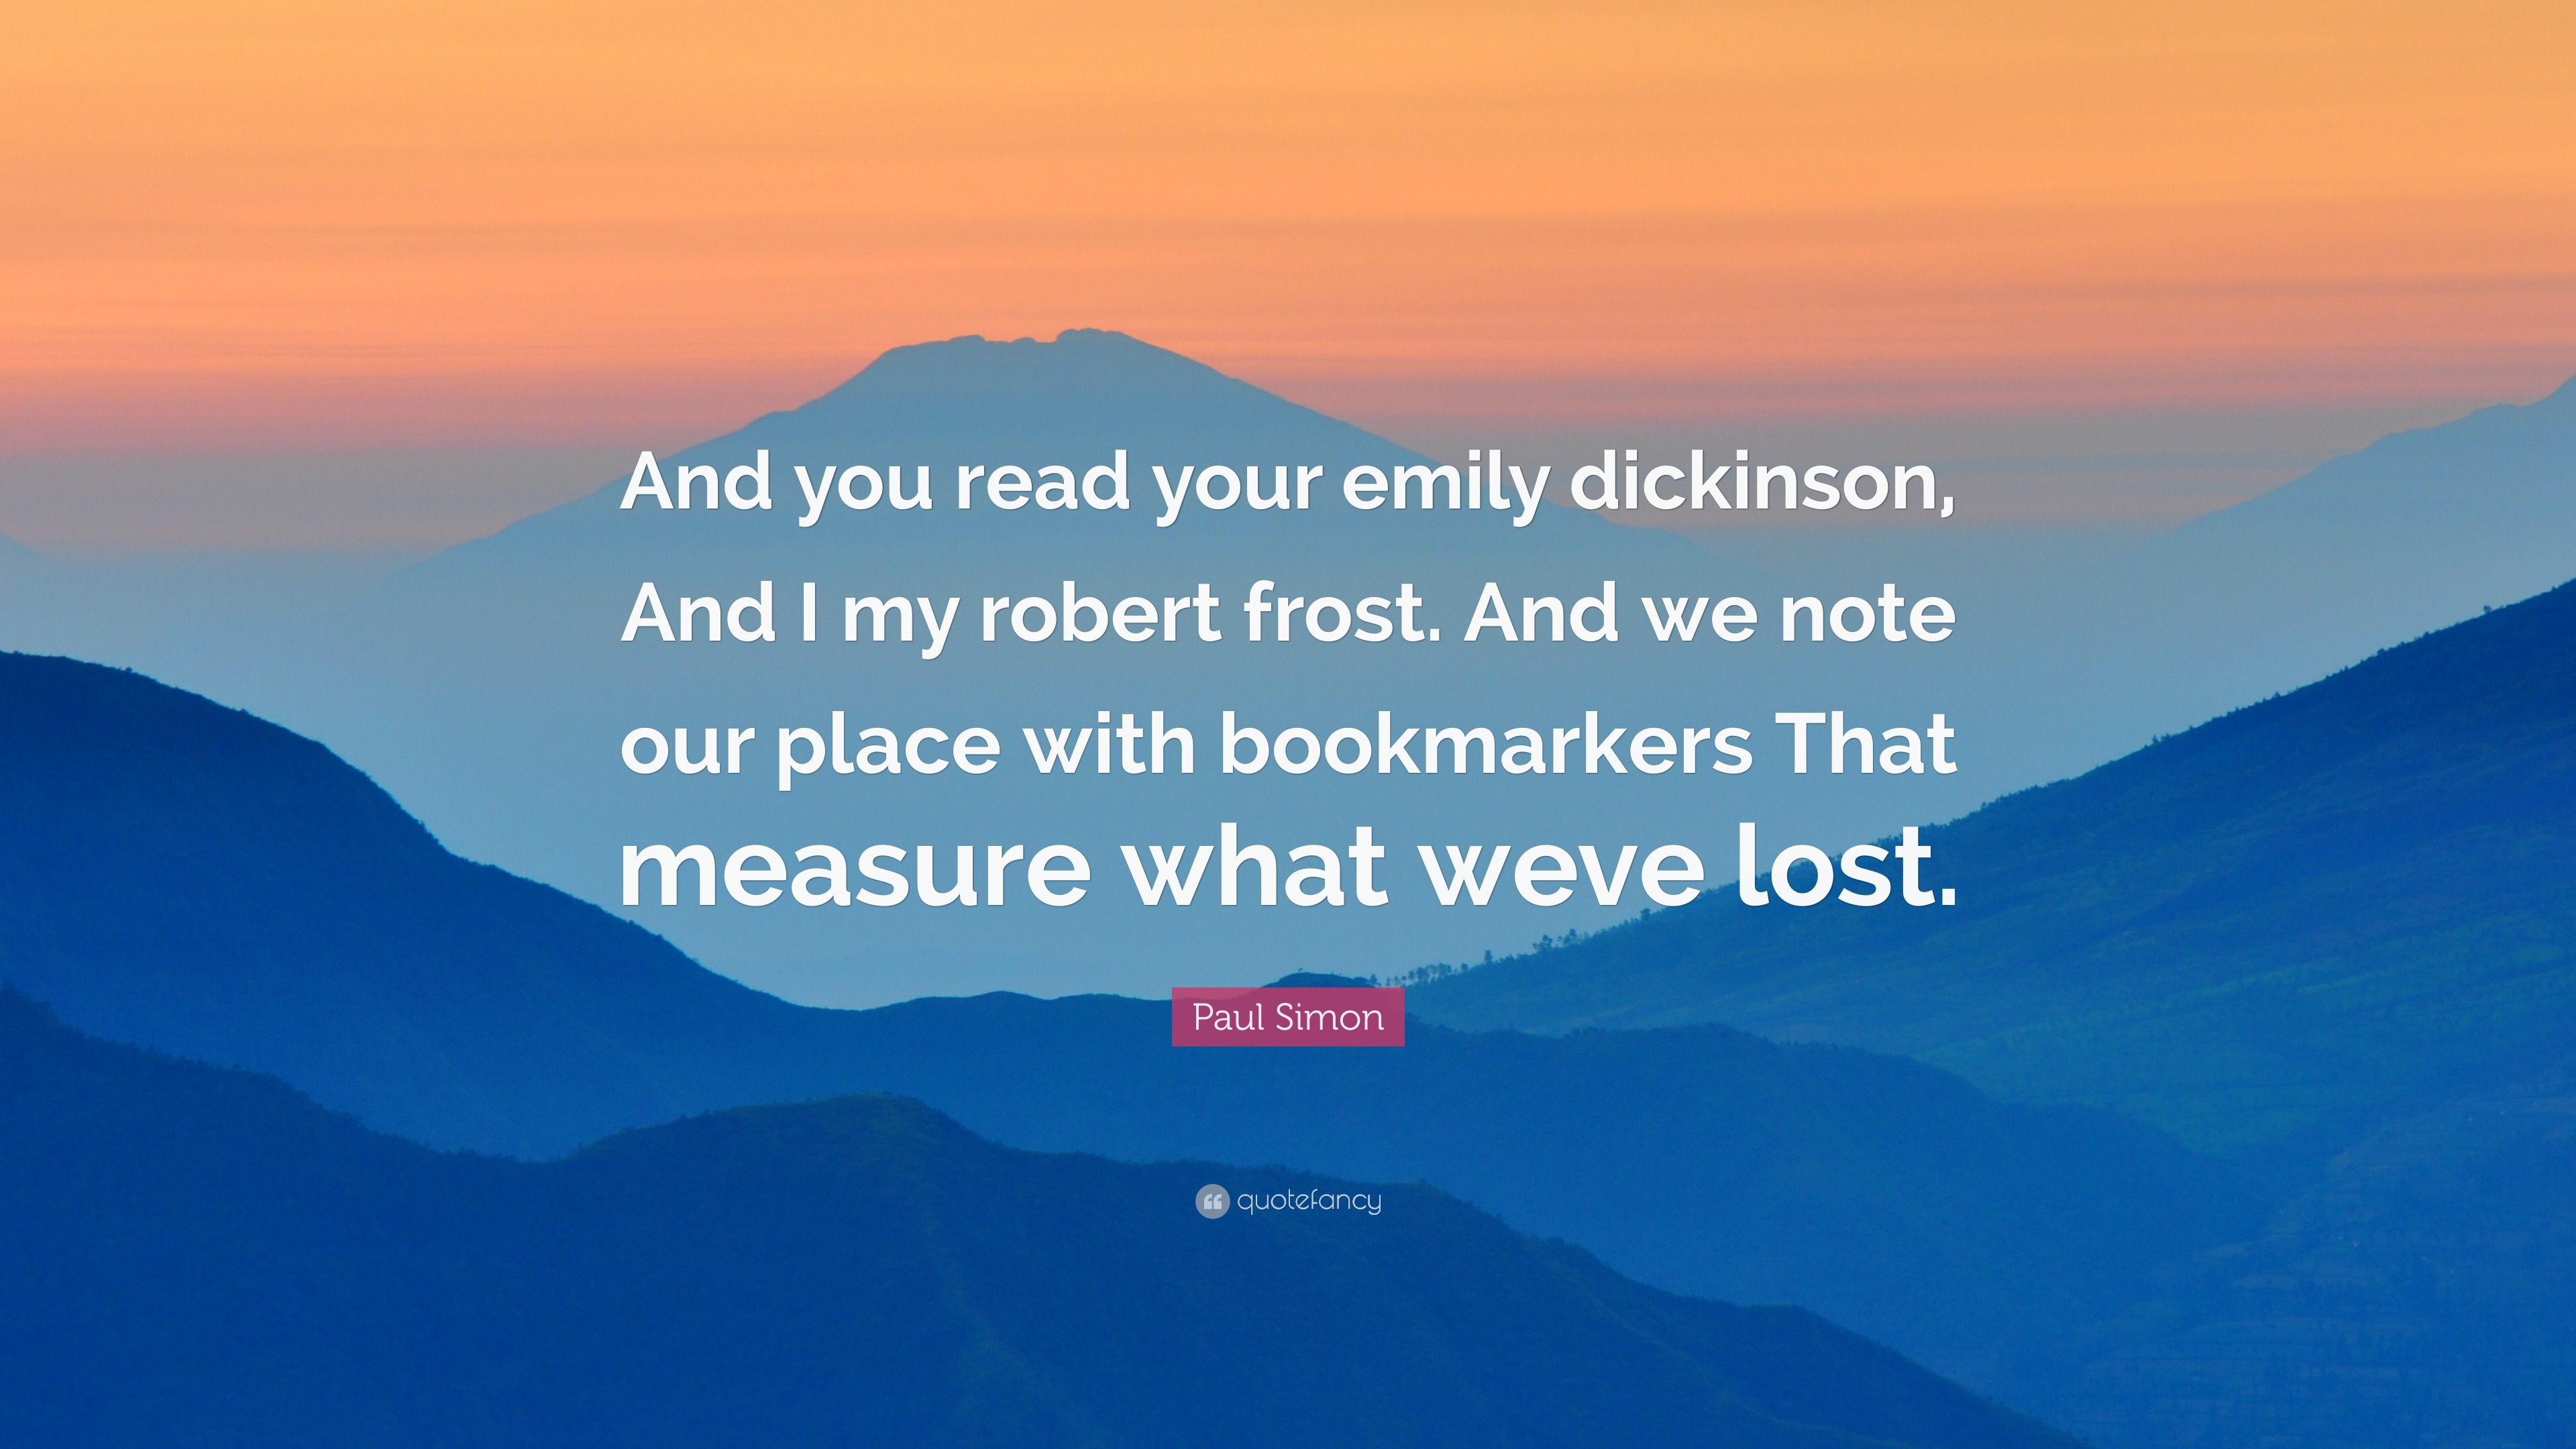 Paul Simon Quote: “And You Read Your Emily Dickinson, And I My Robert Frost. And We Note Our Place With Bookmarkers That Measure What Weve ...”